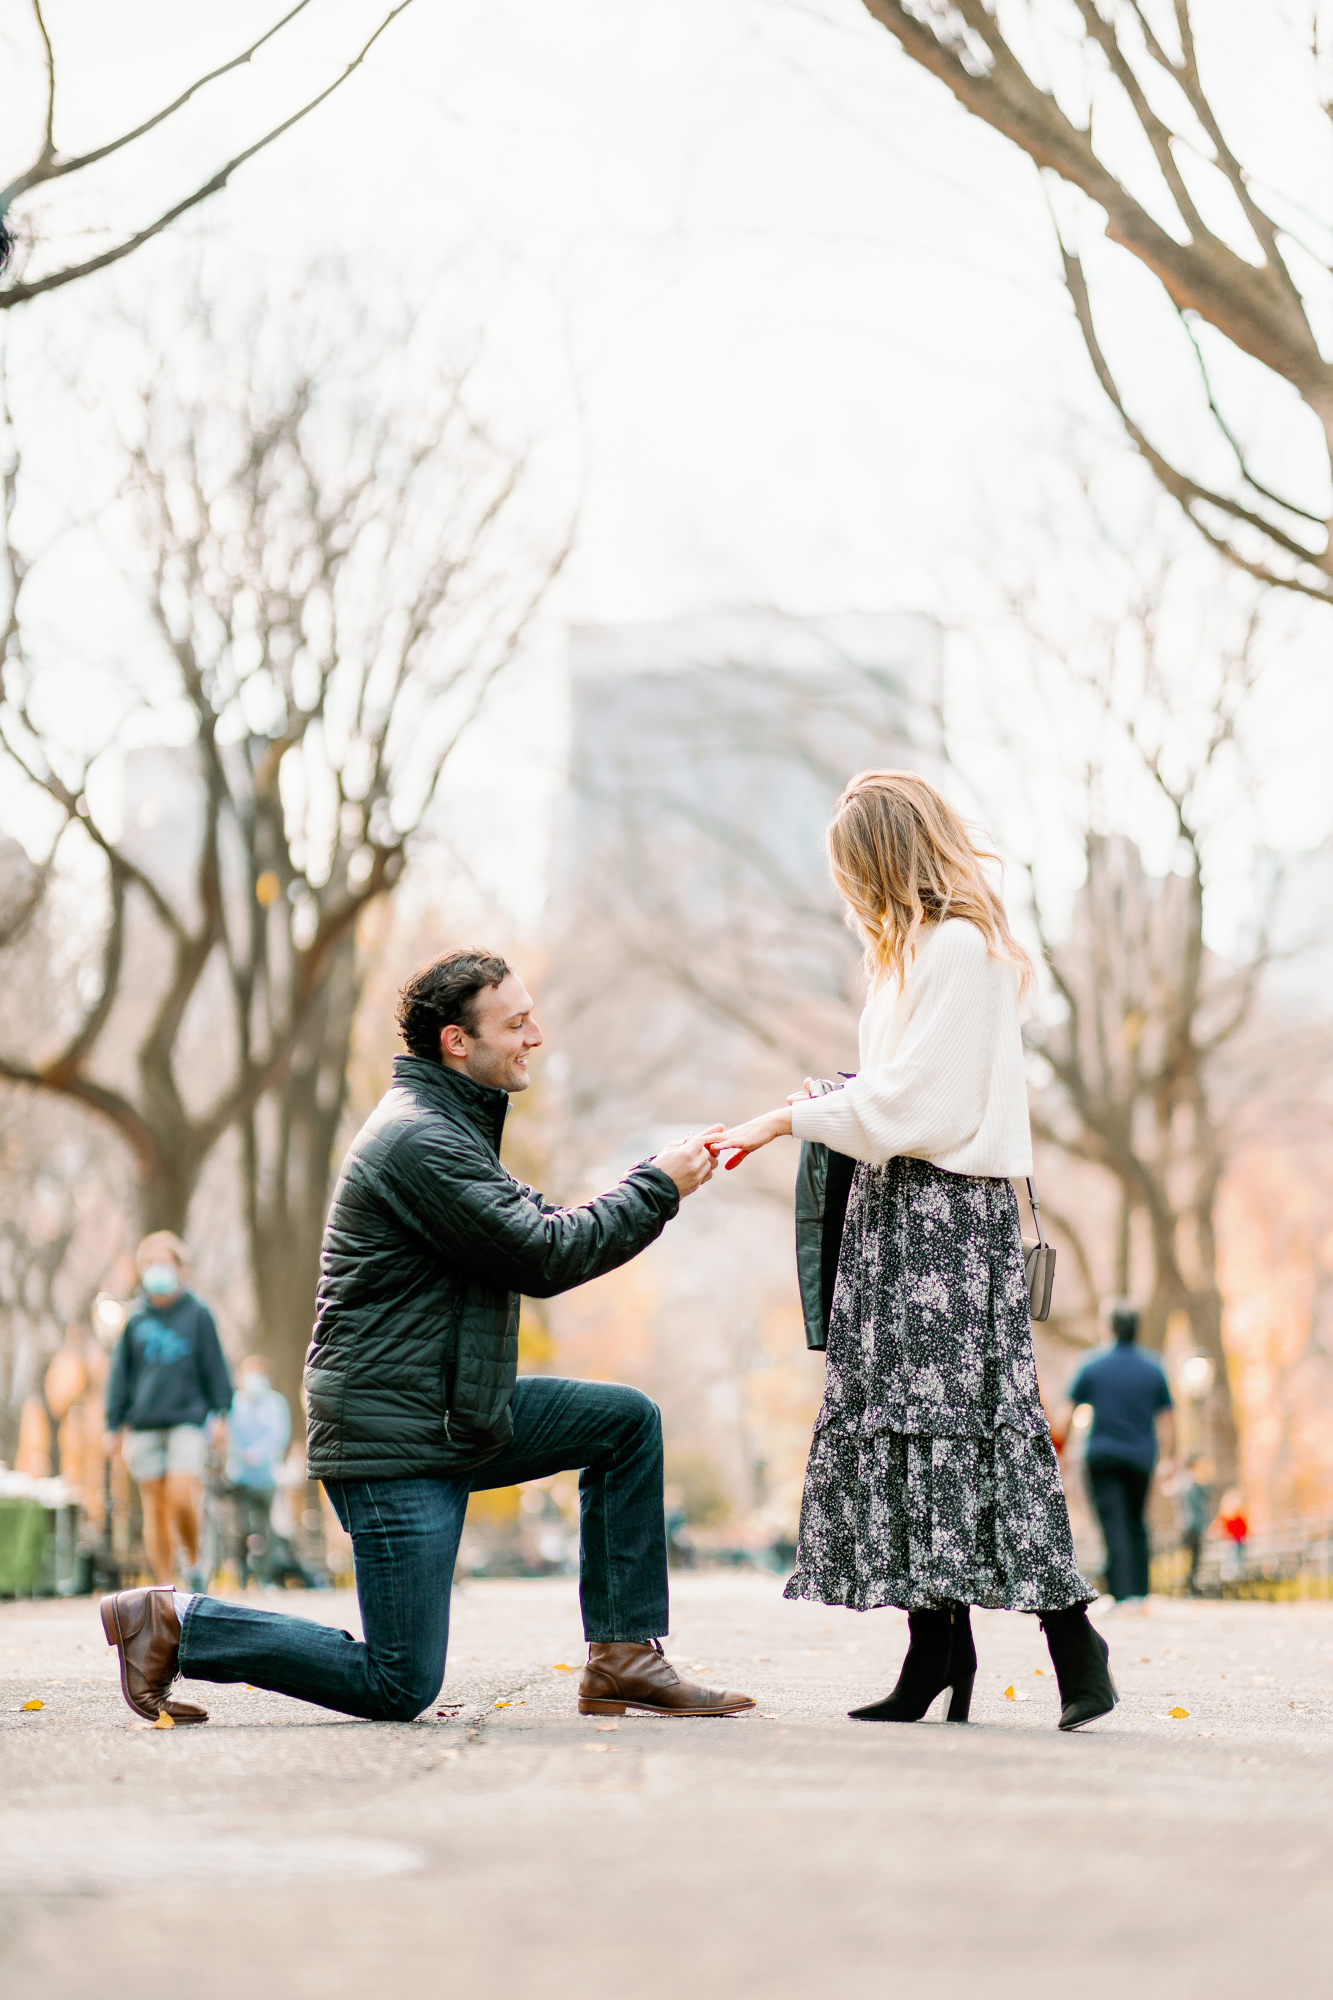 Intimate Proposal Photography, New York